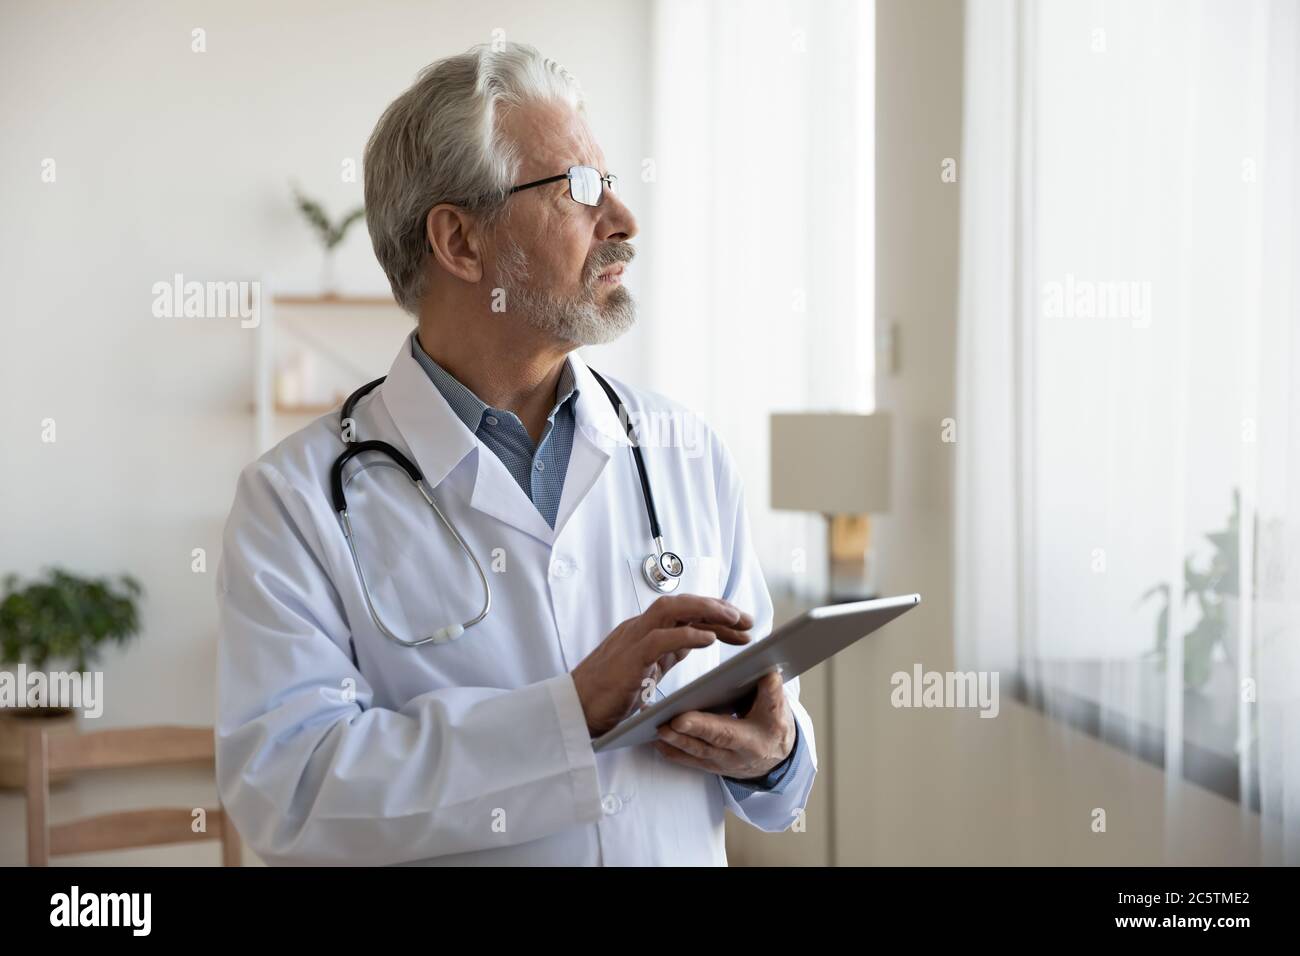 Pensive senior doctor use tablet making decision Stock Photo